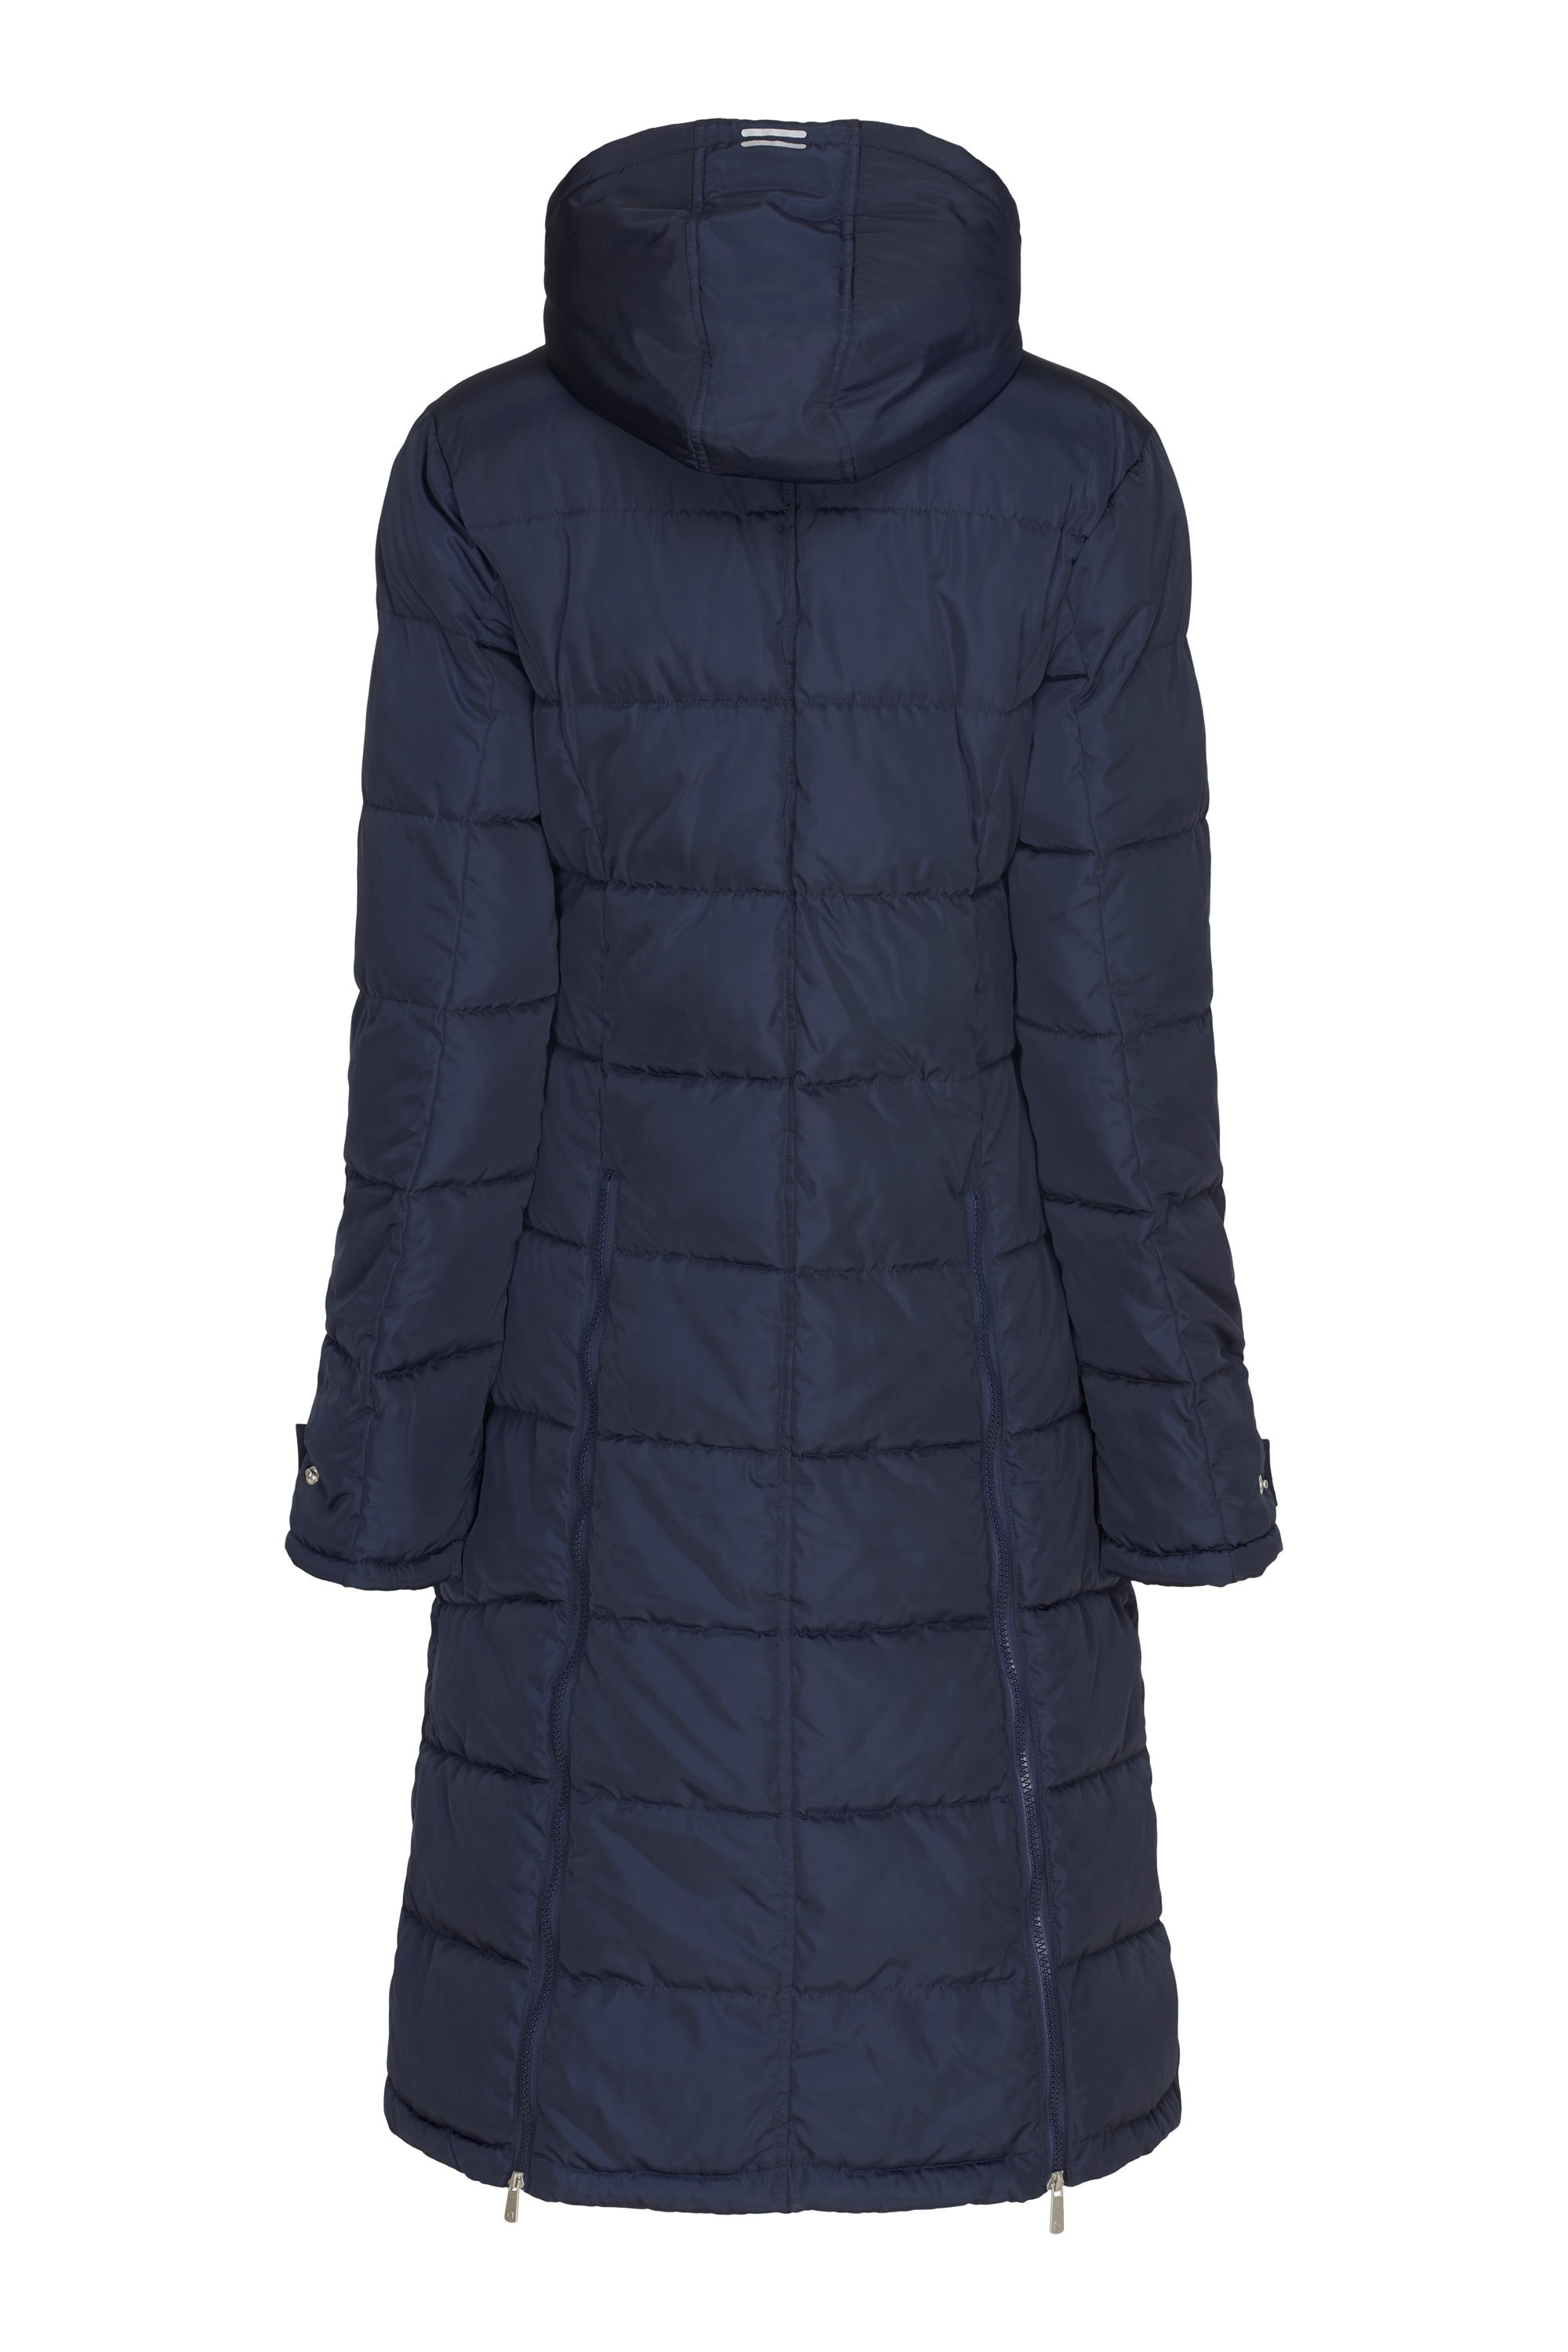 Equipage Candice Kids Long Jacket -